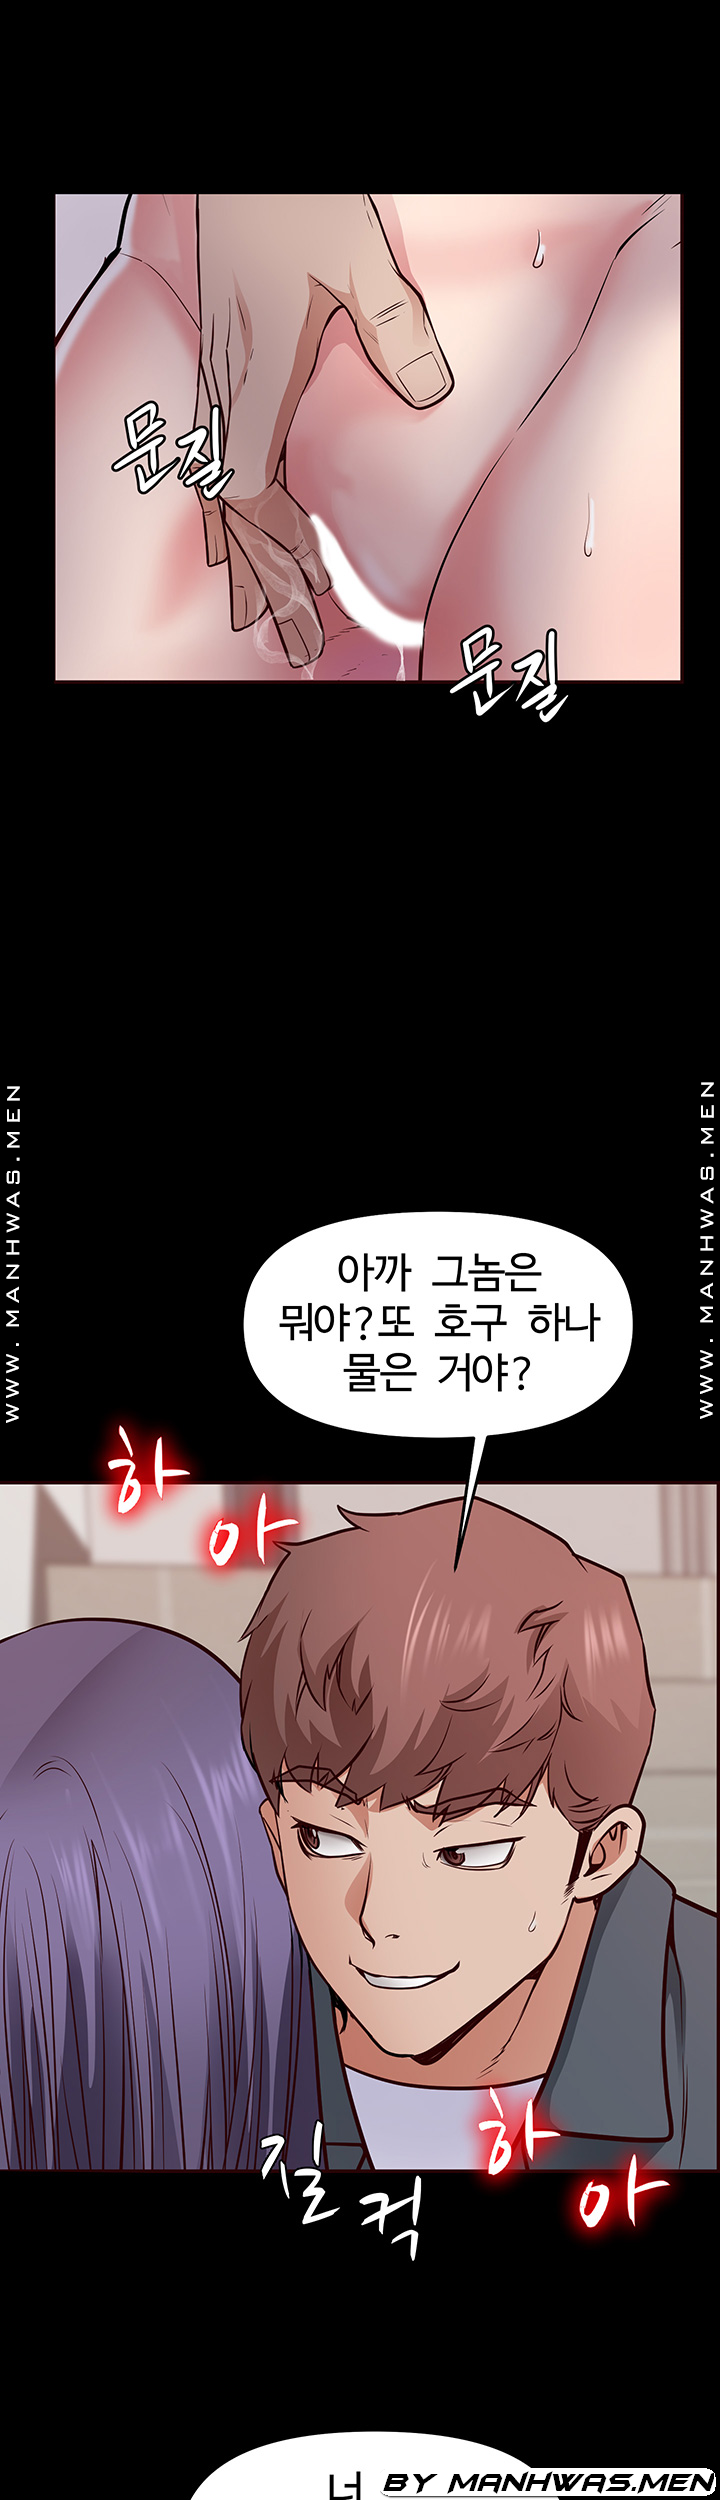 bs-anger-raw-chap-8-20